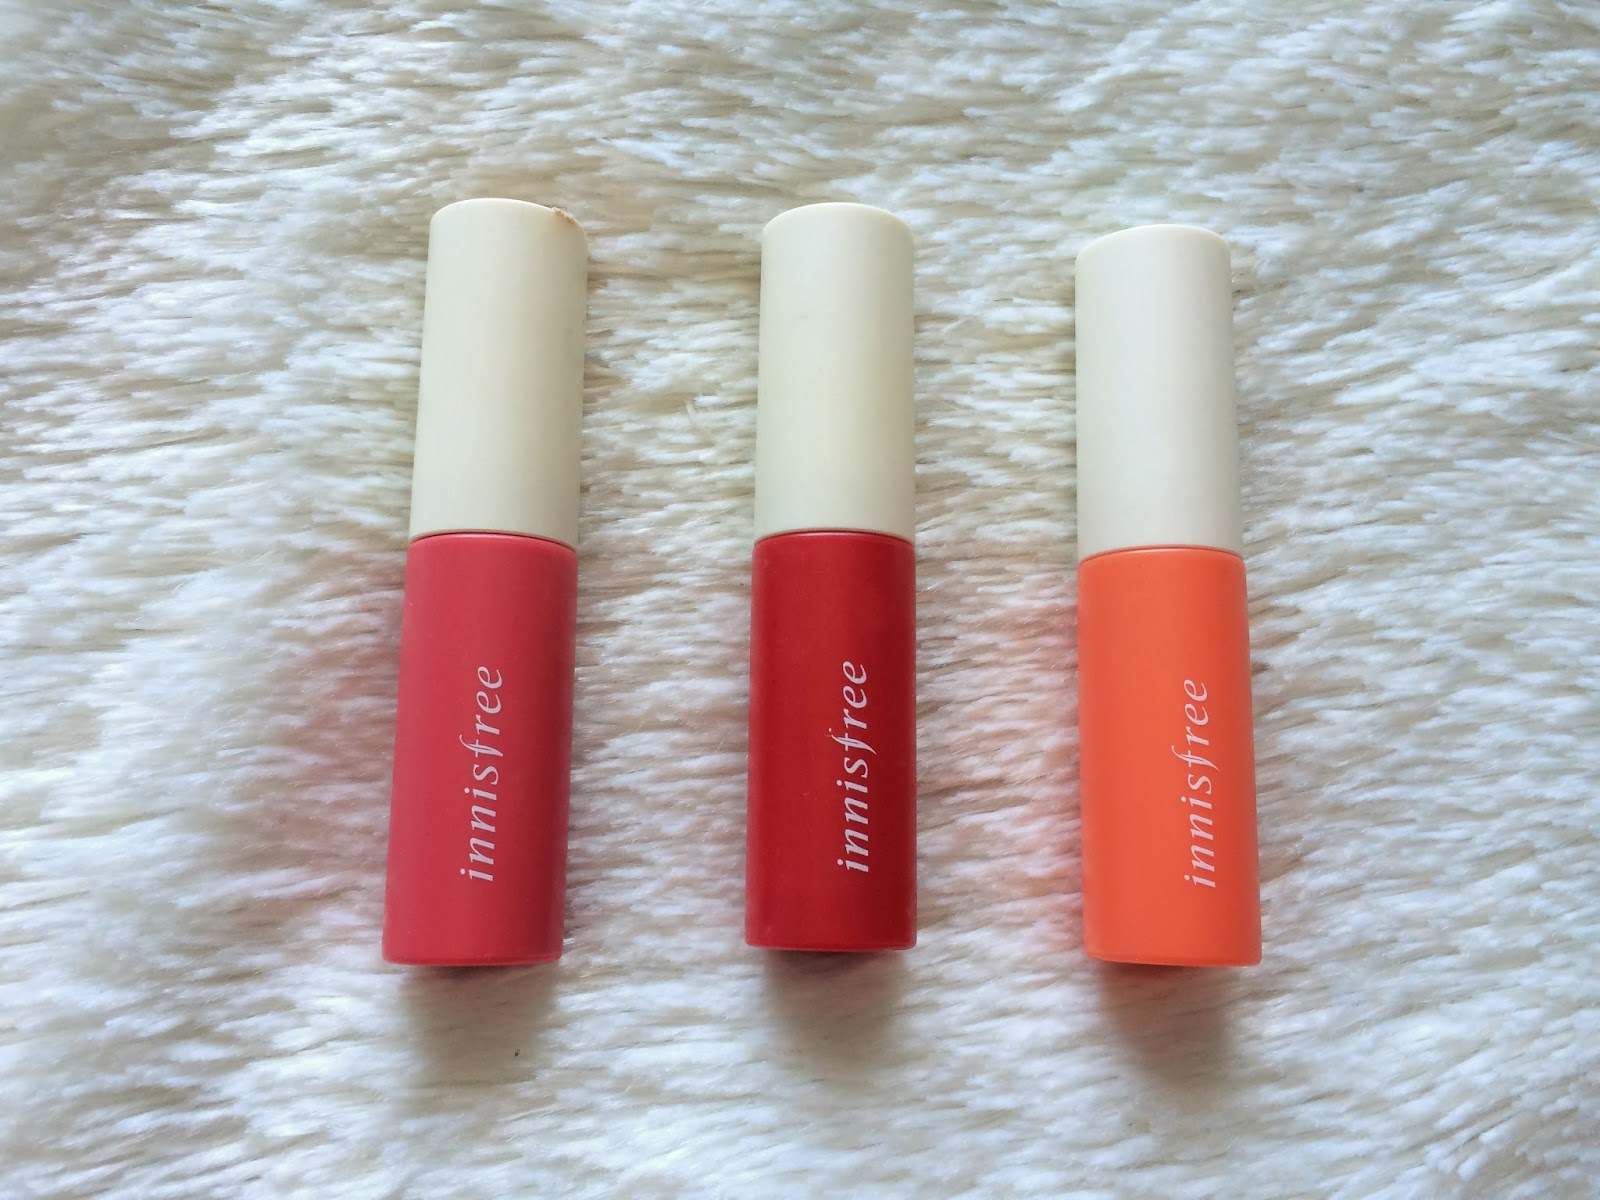 Innisfree Eco Flower Tint in Camellia, Rose and Balsam